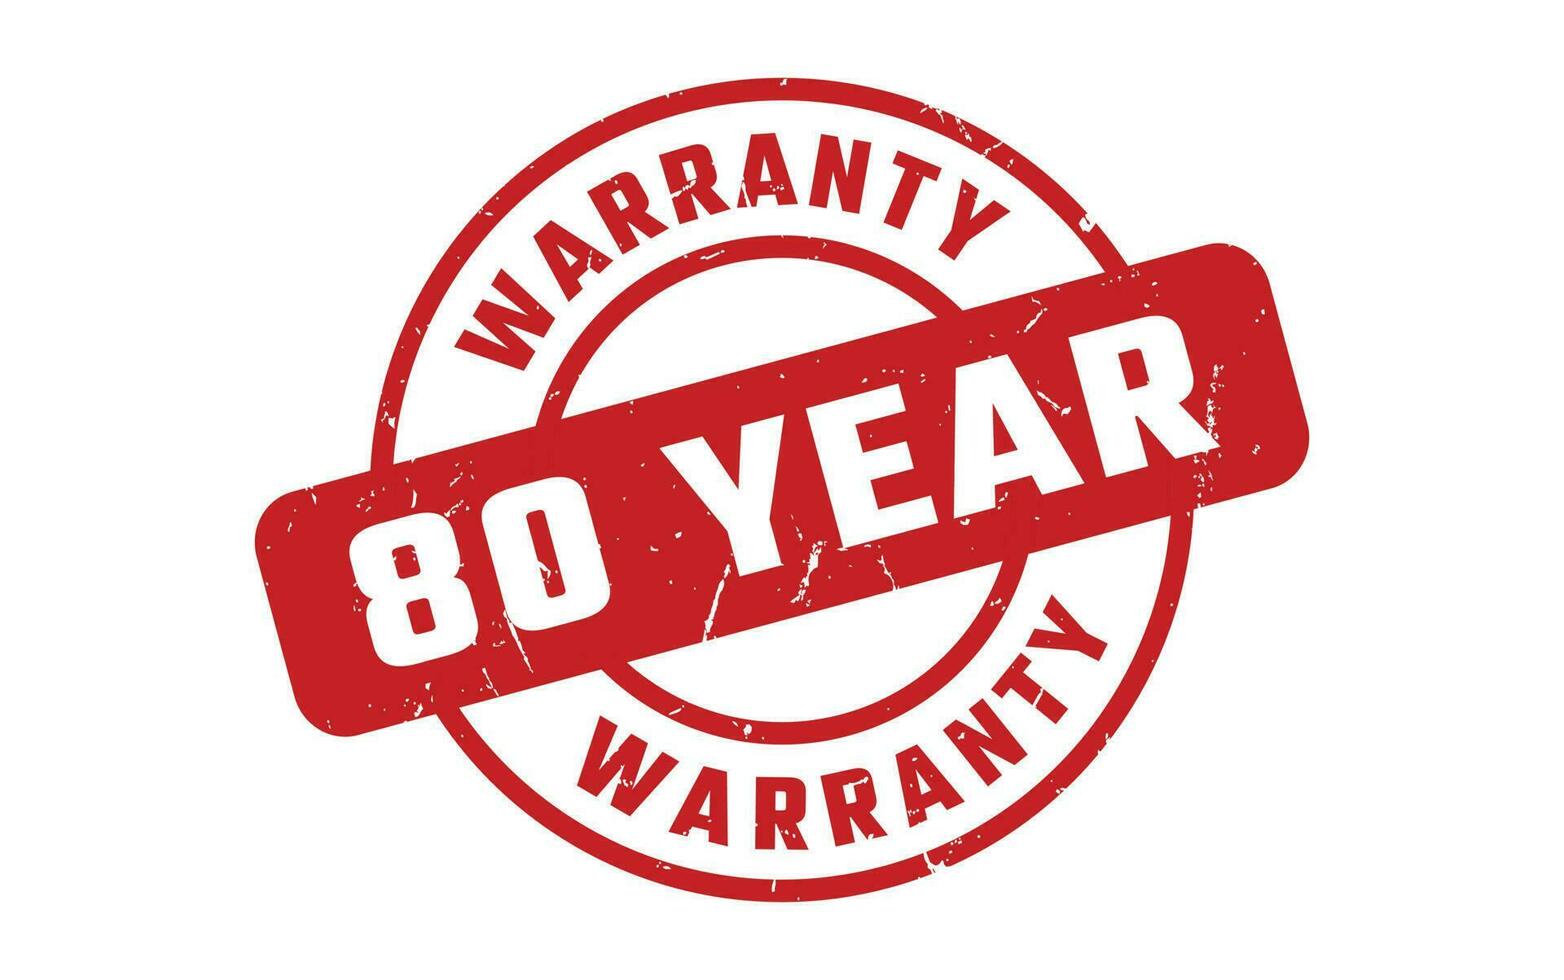 80 Year Warranty Rubber Stamp vector